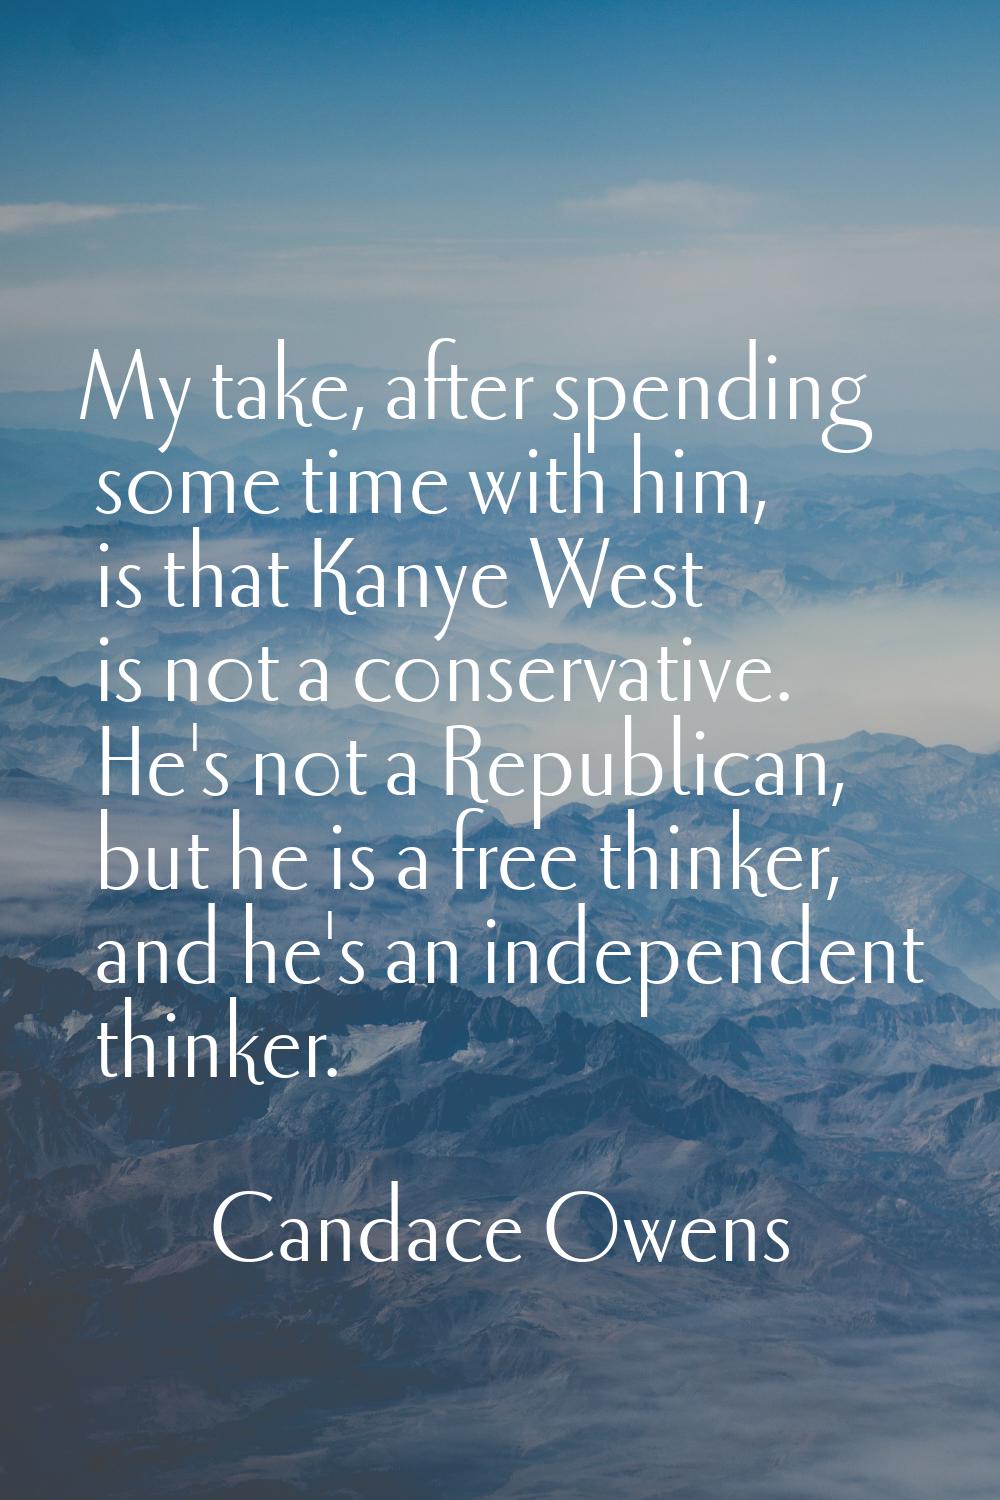 My take, after spending some time with him, is that Kanye West is not a conservative. He's not a Re